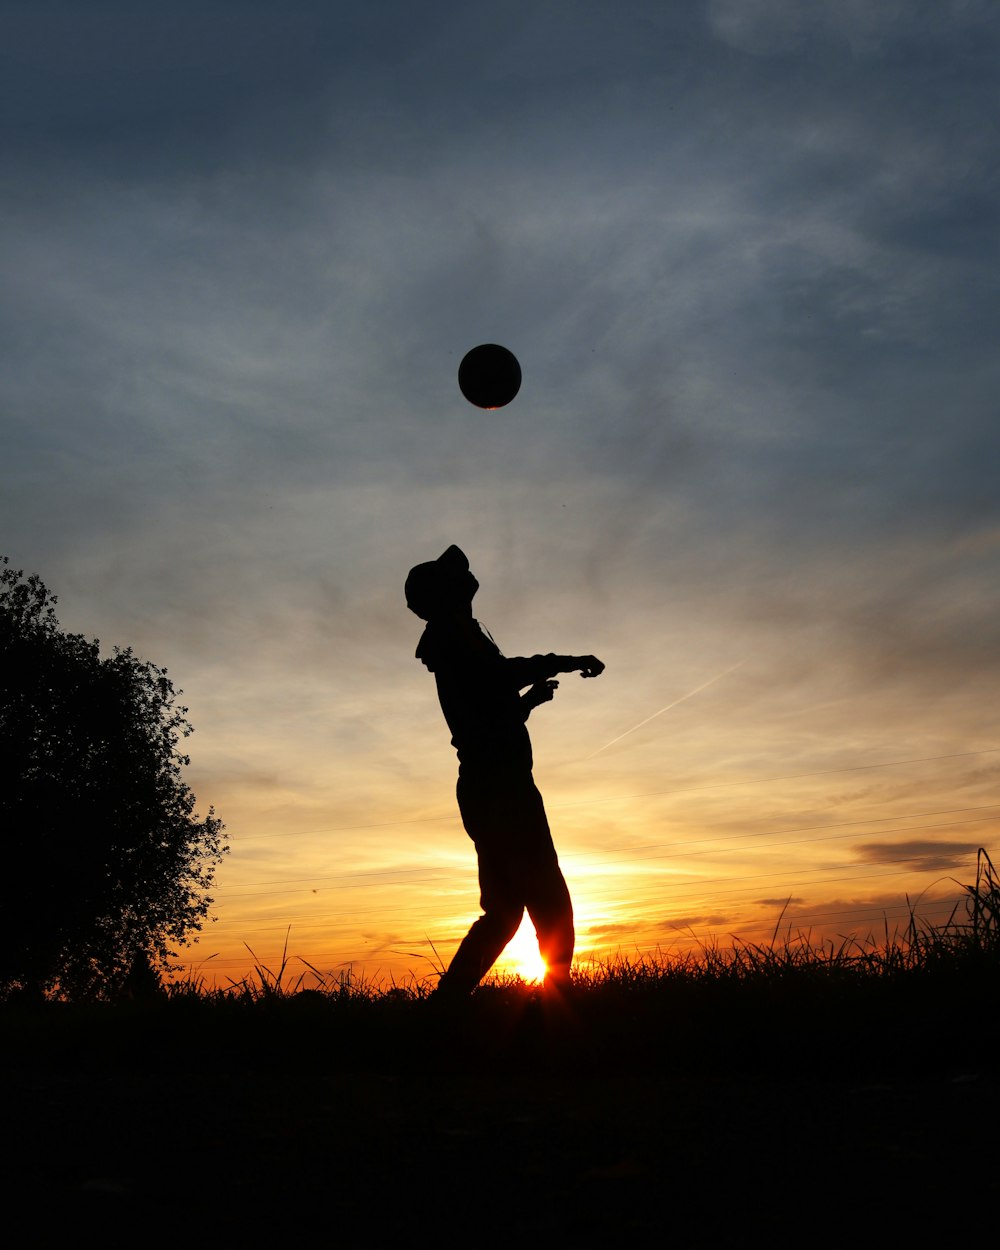 a silhouette of a person playing with a ball